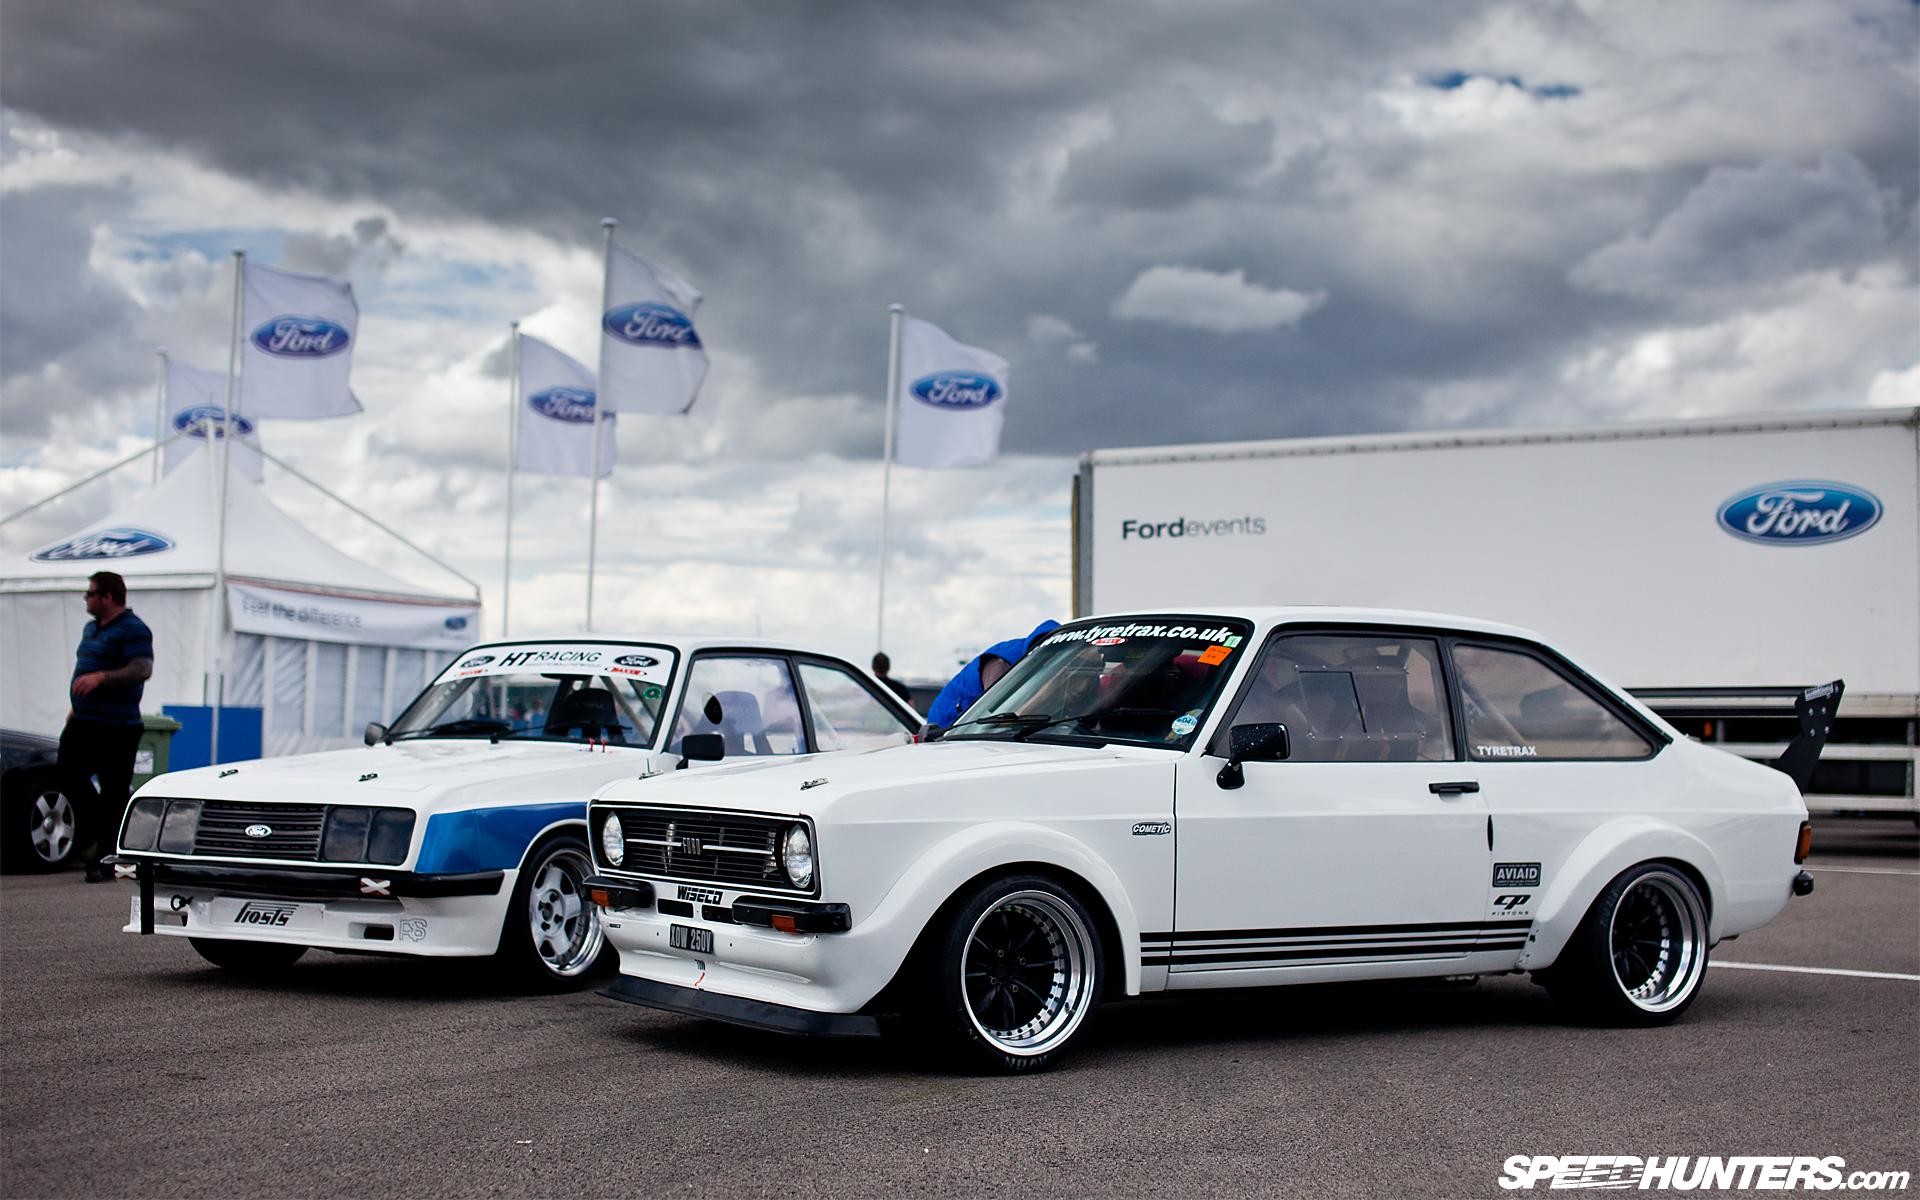 1920x1200 Ford Escort Wallpapers